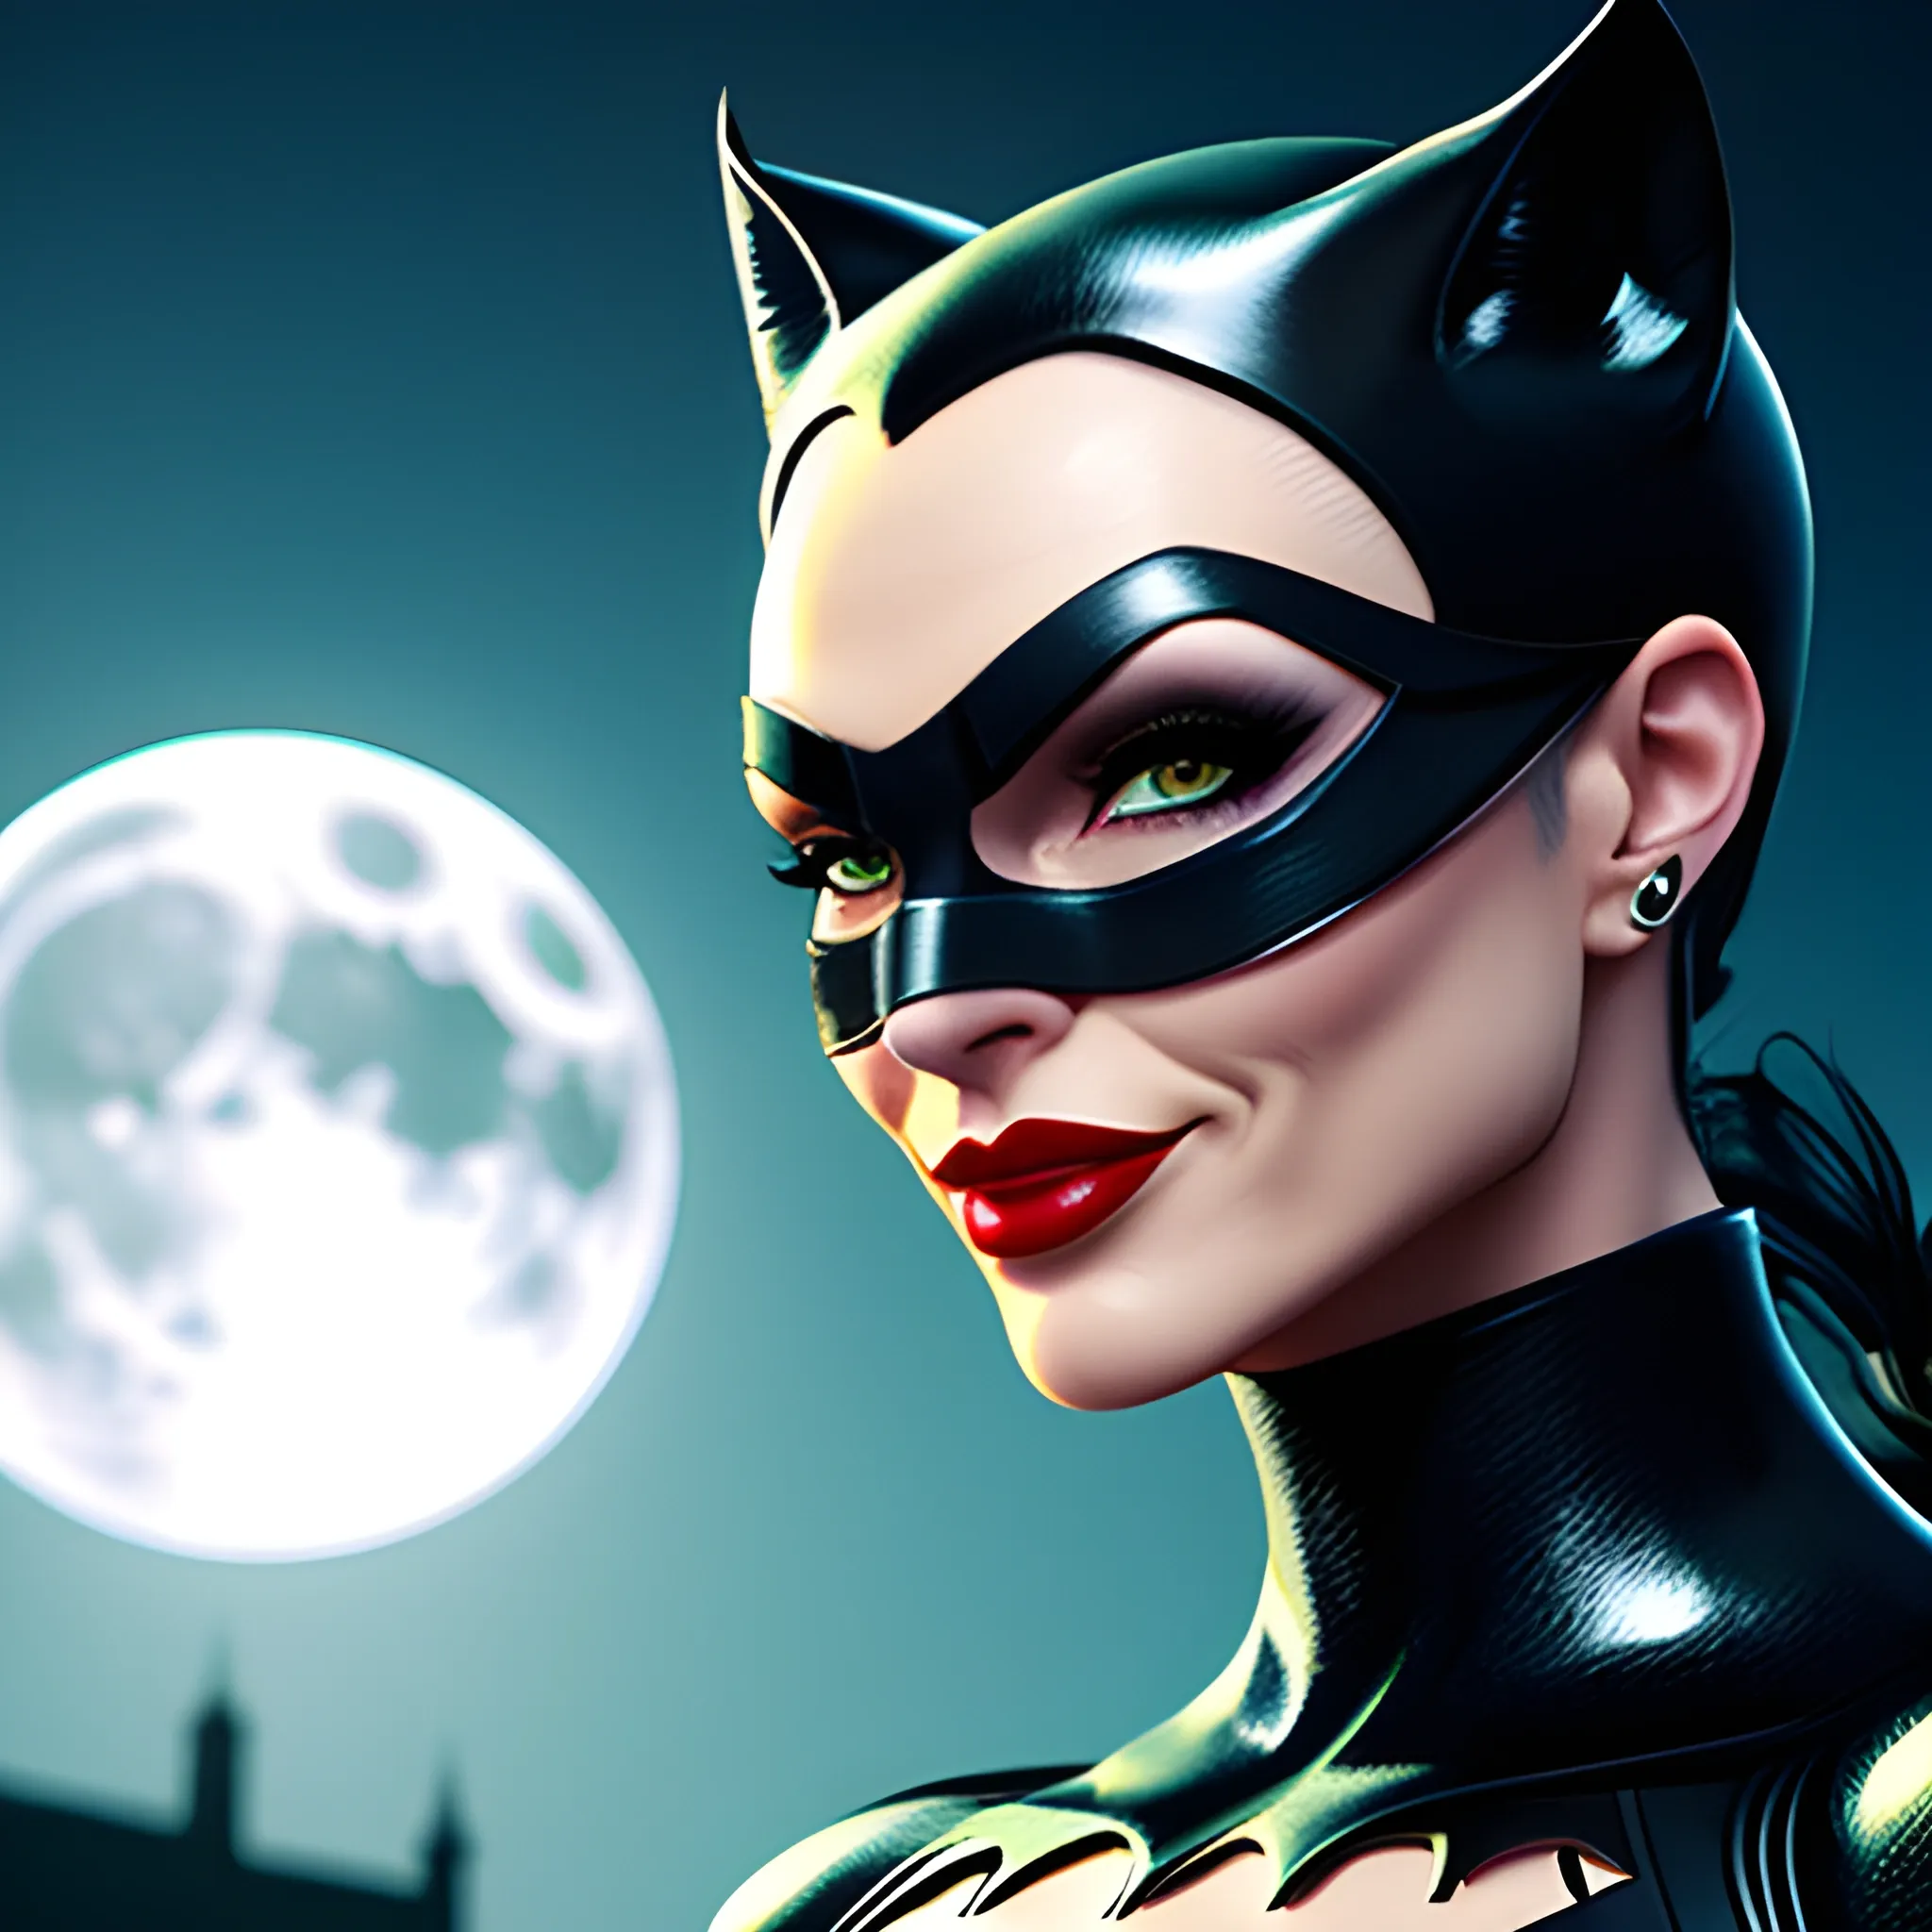 Charming young catwoman in strong light night, realistic portrait style under moonlight, 3D